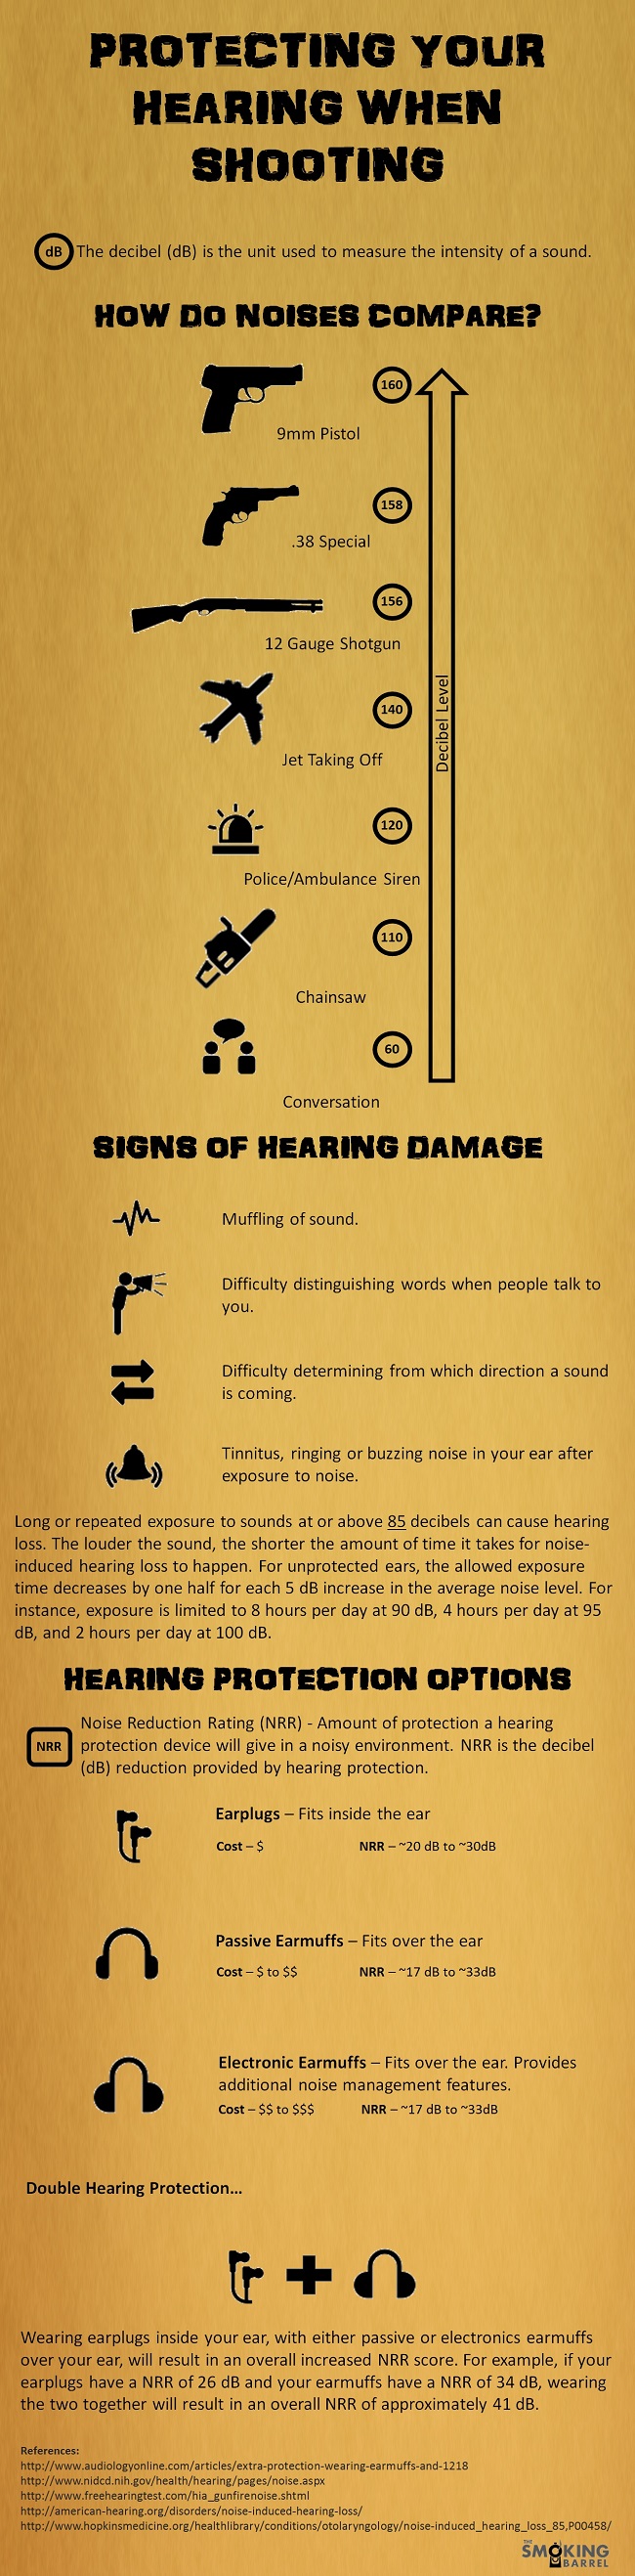 How Shooting Affects Your Hearing